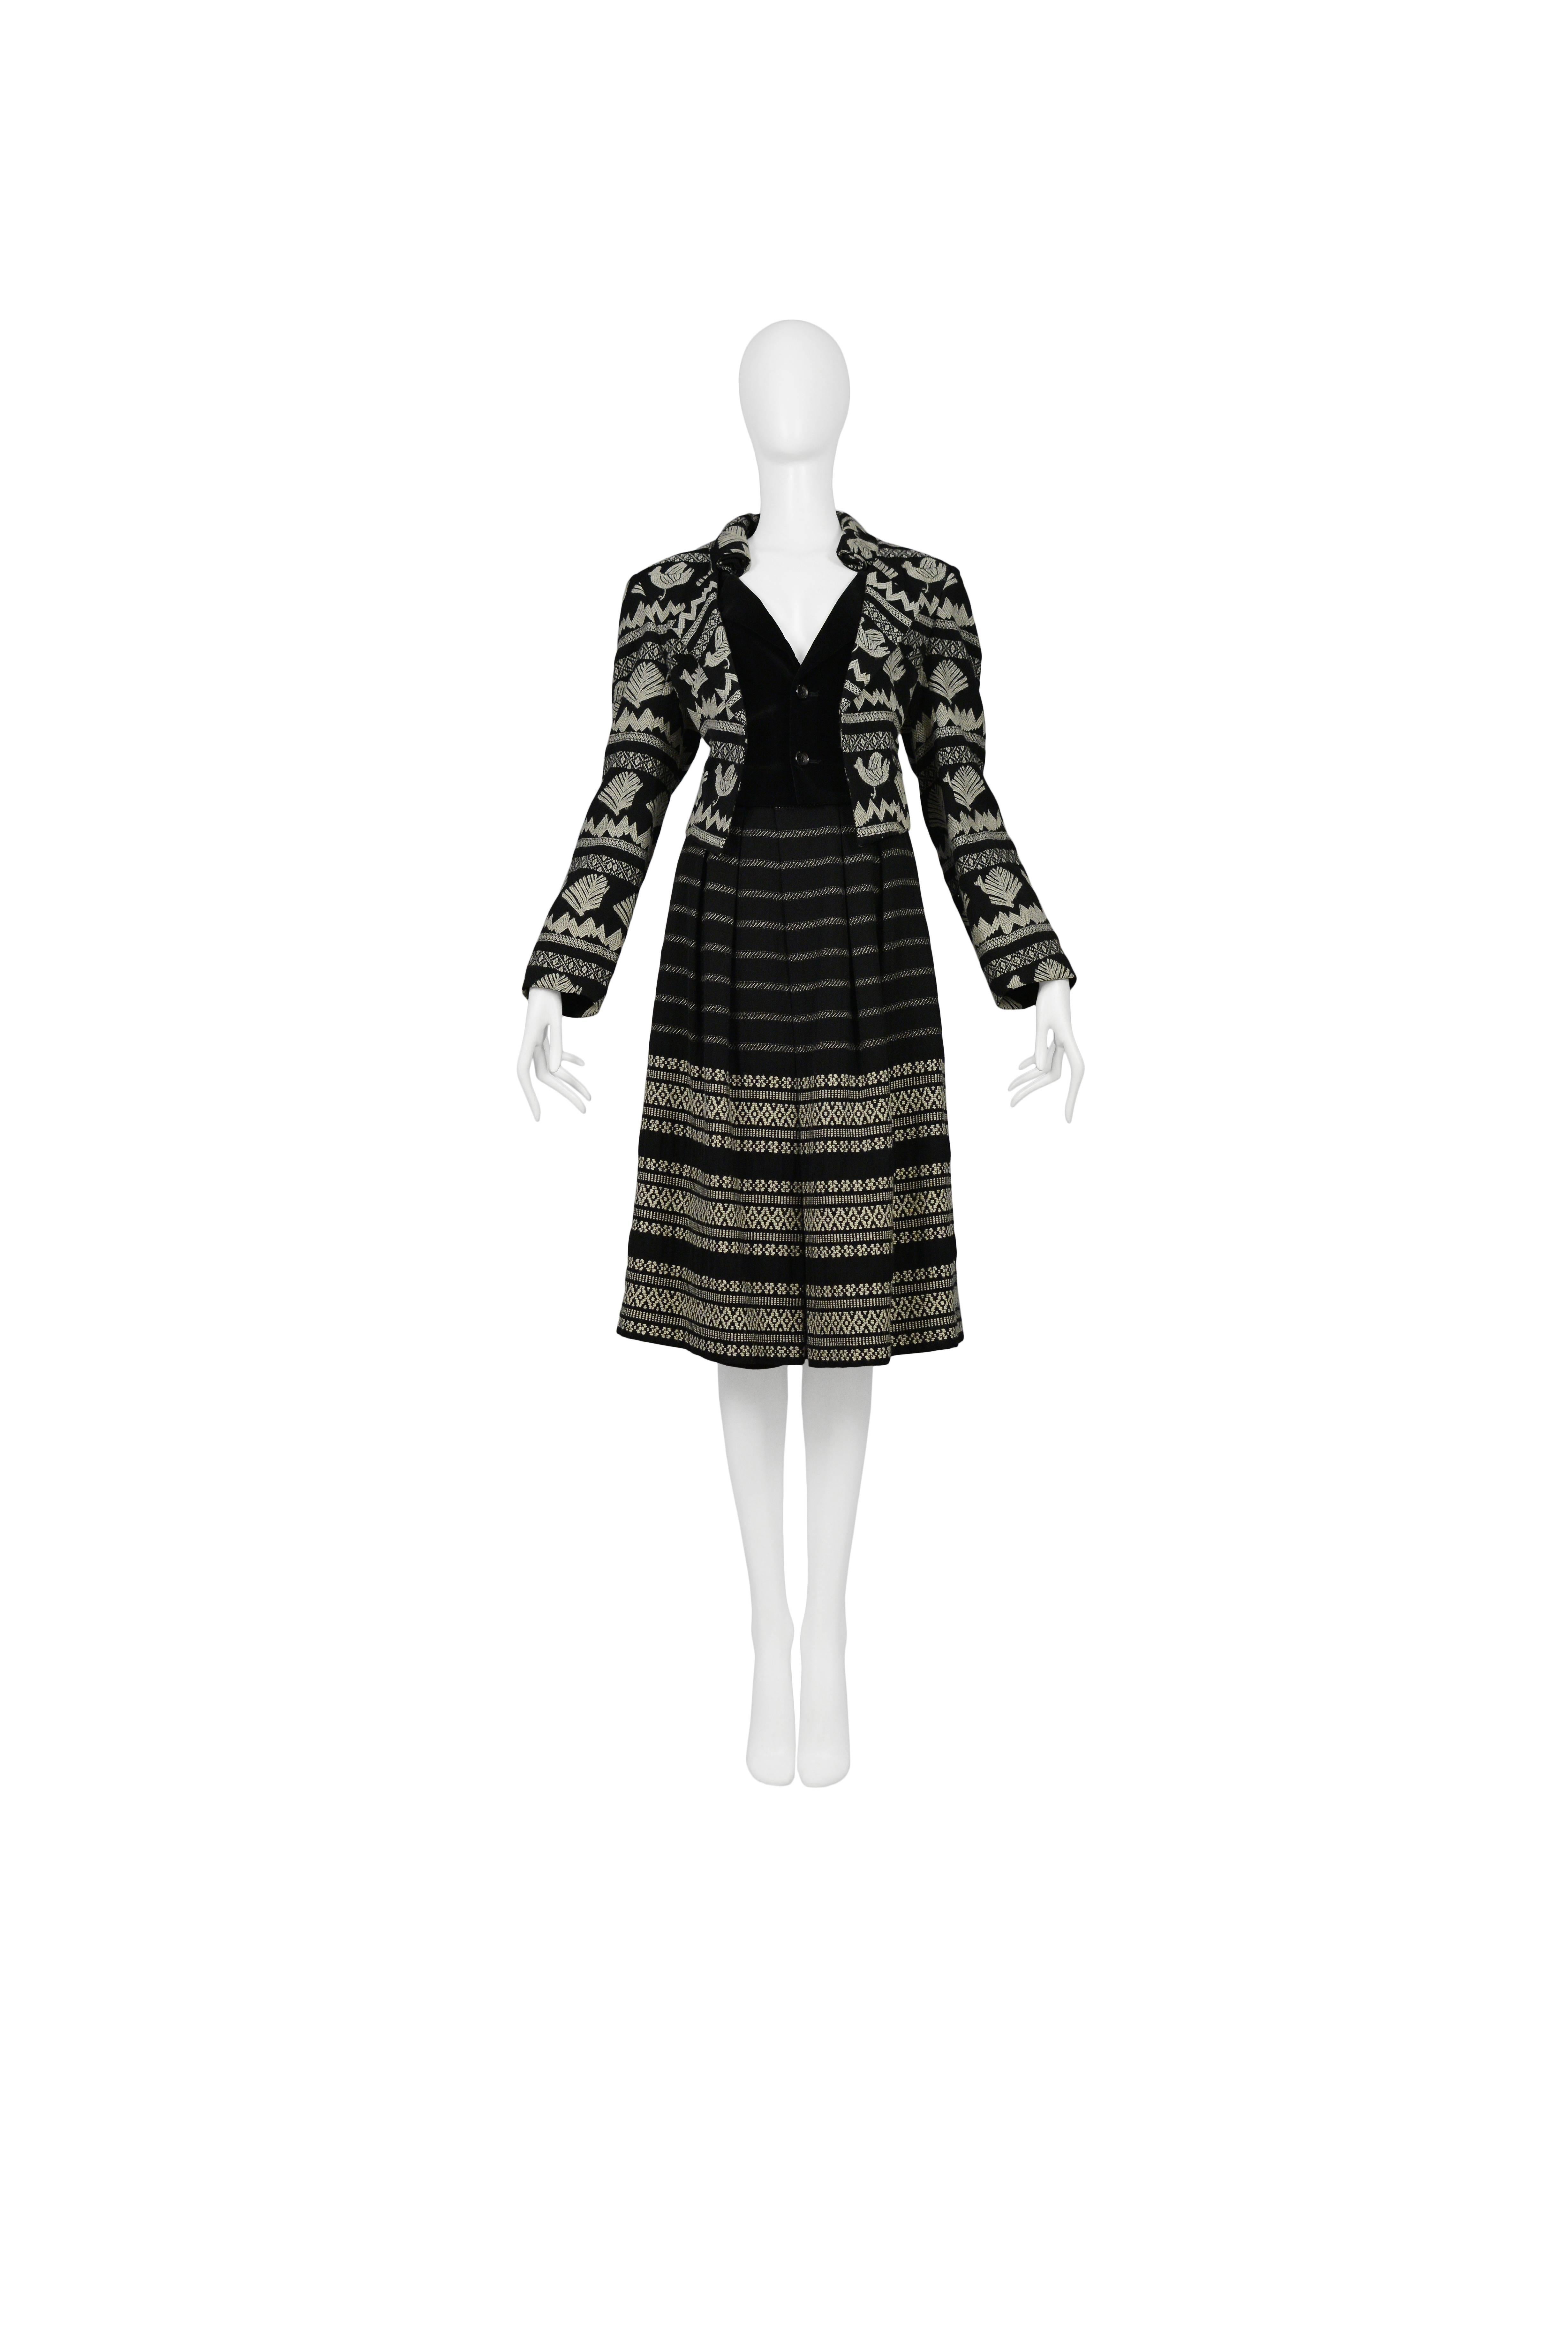 Vintage Comme des Garcons black and white embroidered ensemble featuring a two button front black wool jacket with a black velvet interior panel and white ethnic embroidery throughout. The ensemble includes a black wool knee length skirt with white